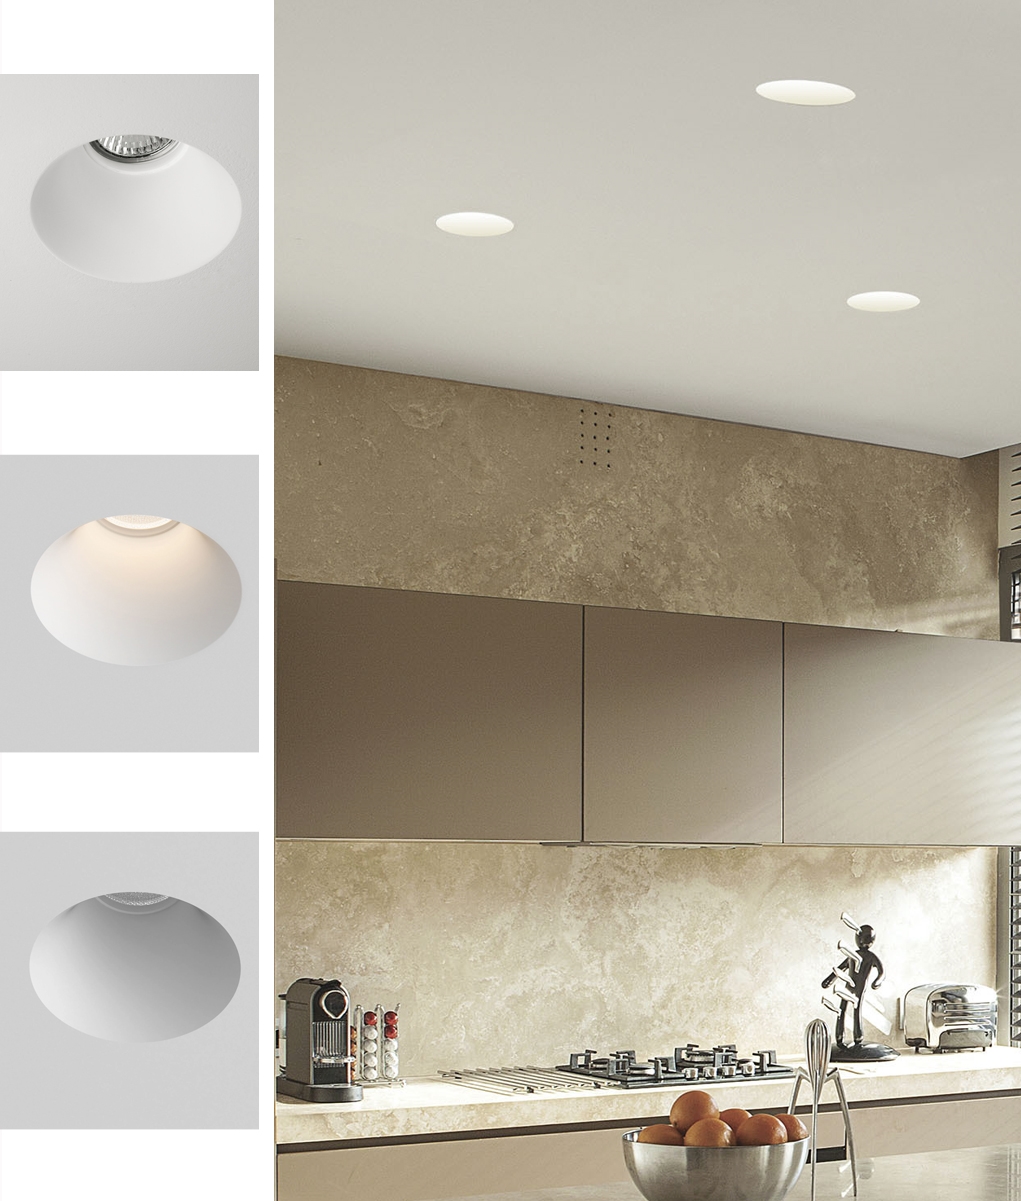 Plaster in downlight - gives a seamless solution to integrating lighting  into your space.